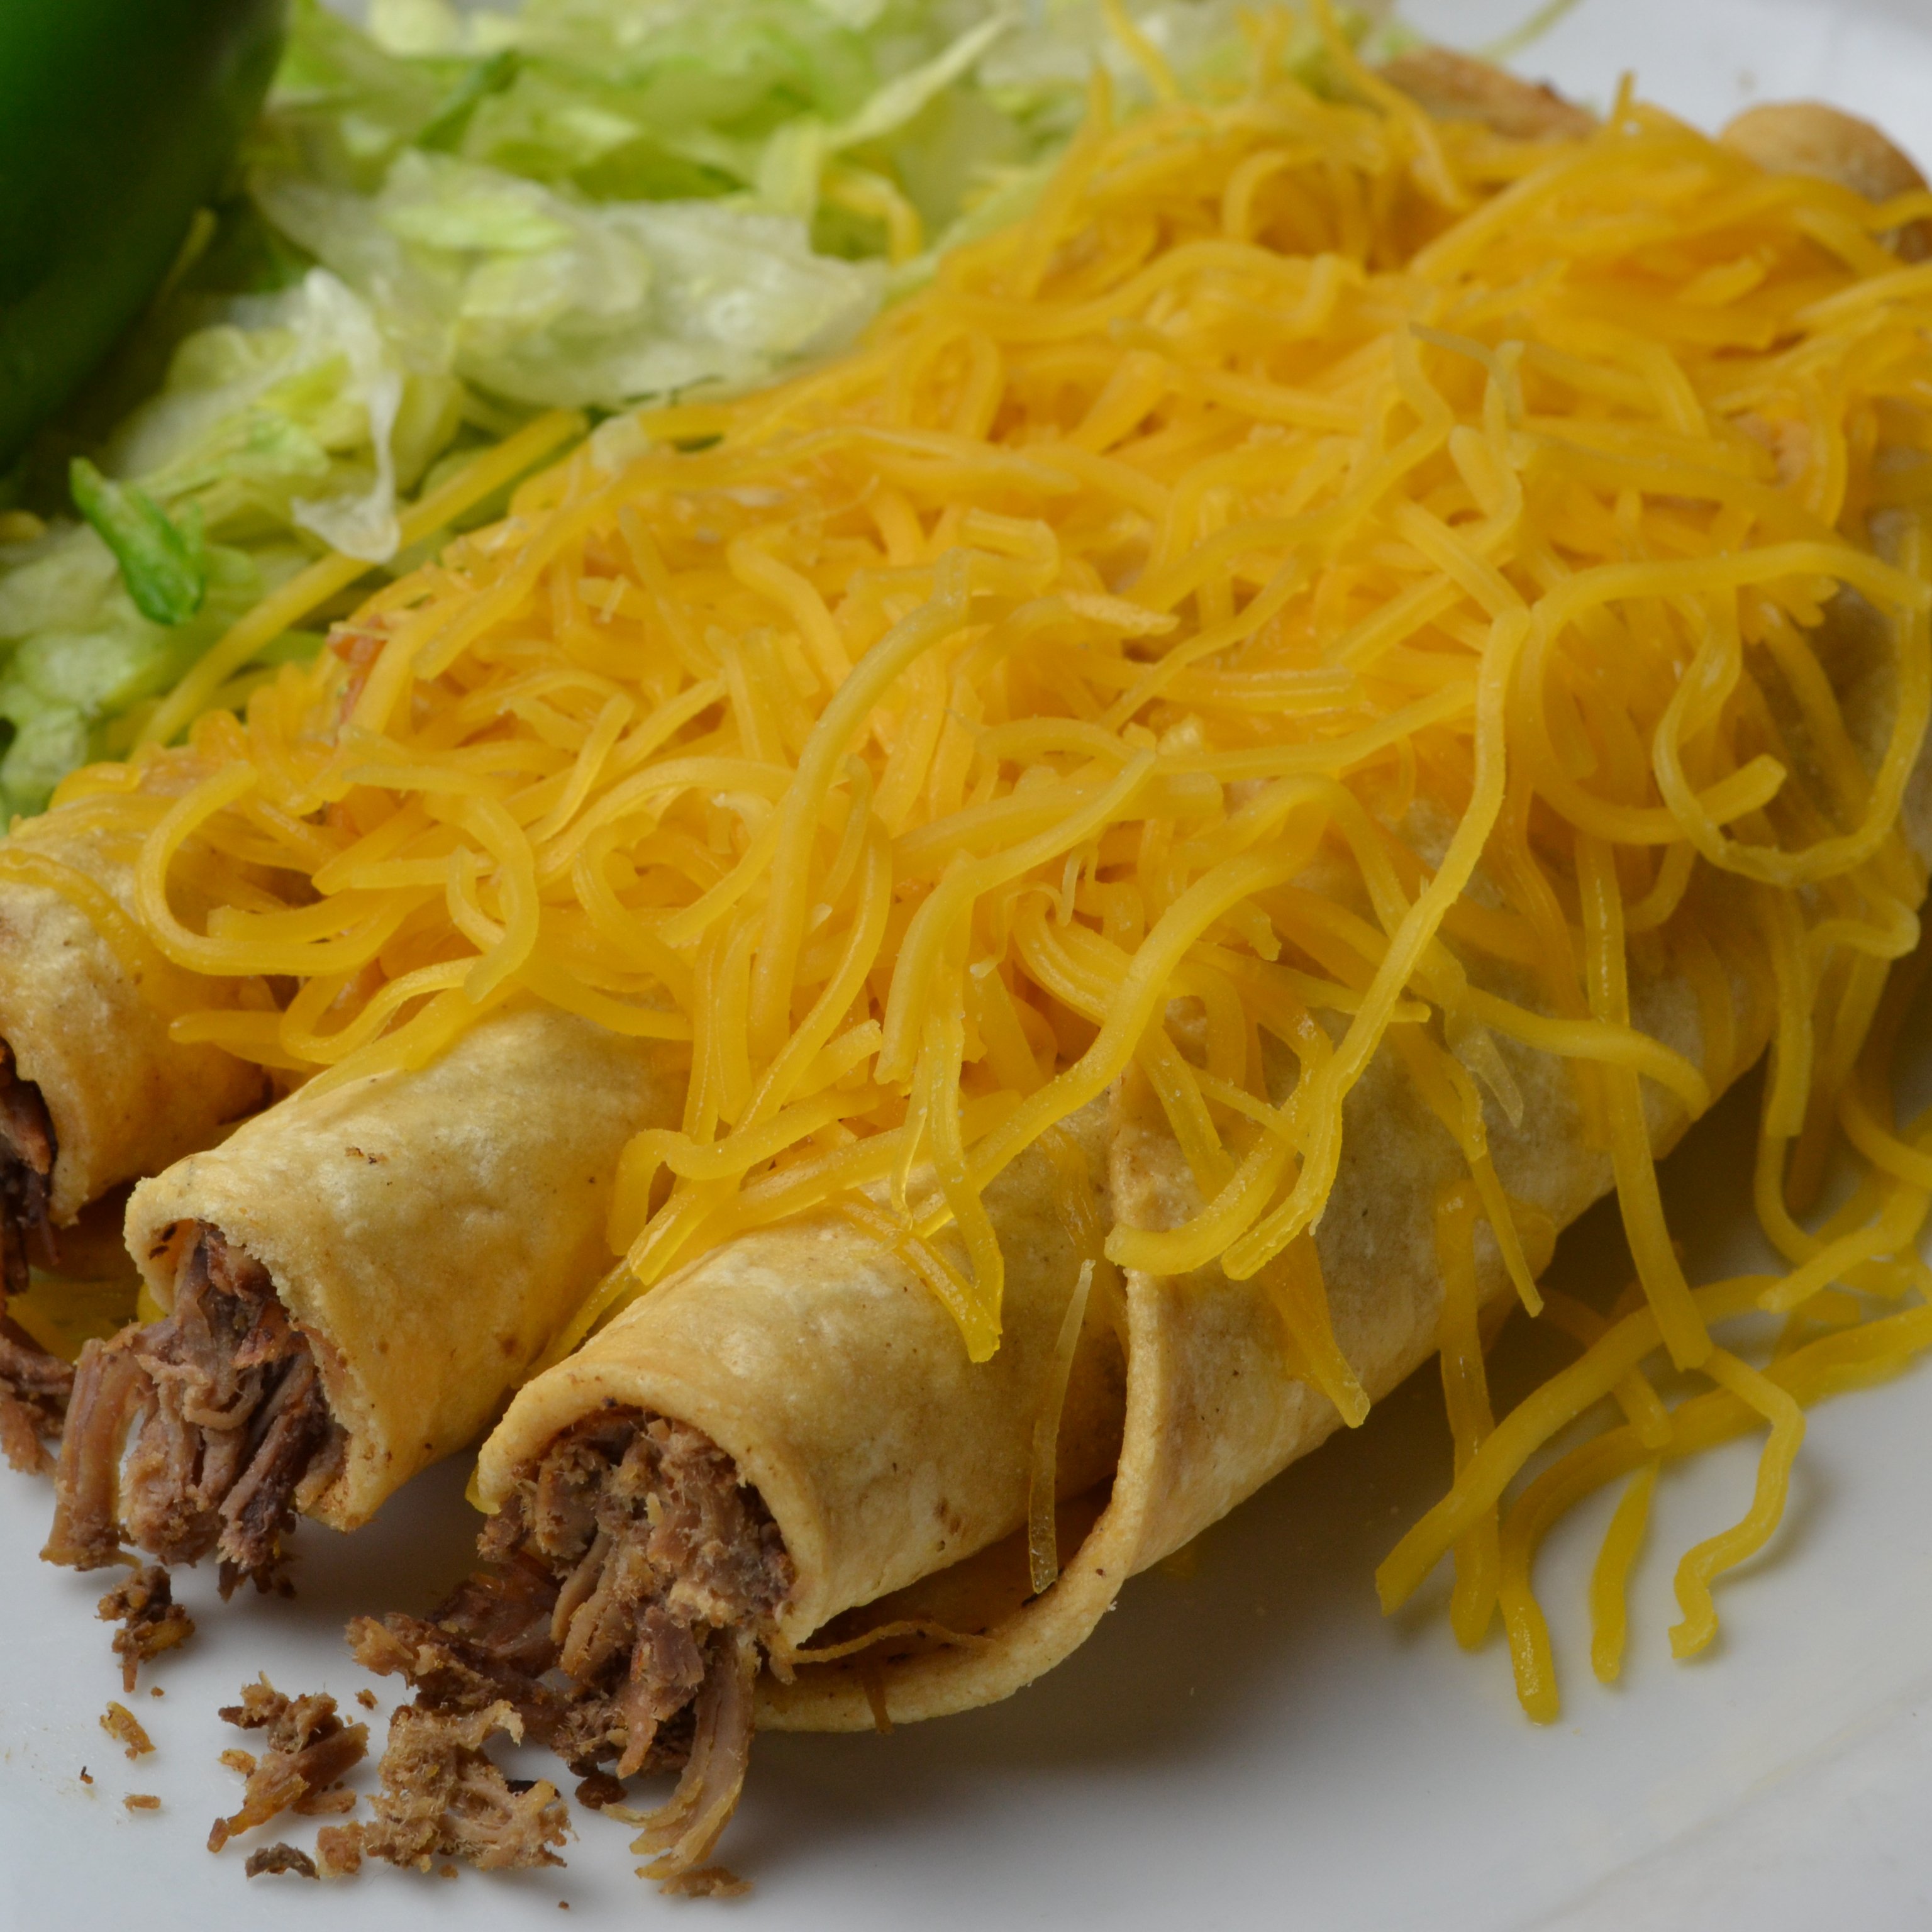 #2 3 Rolled Tacos with Cheese